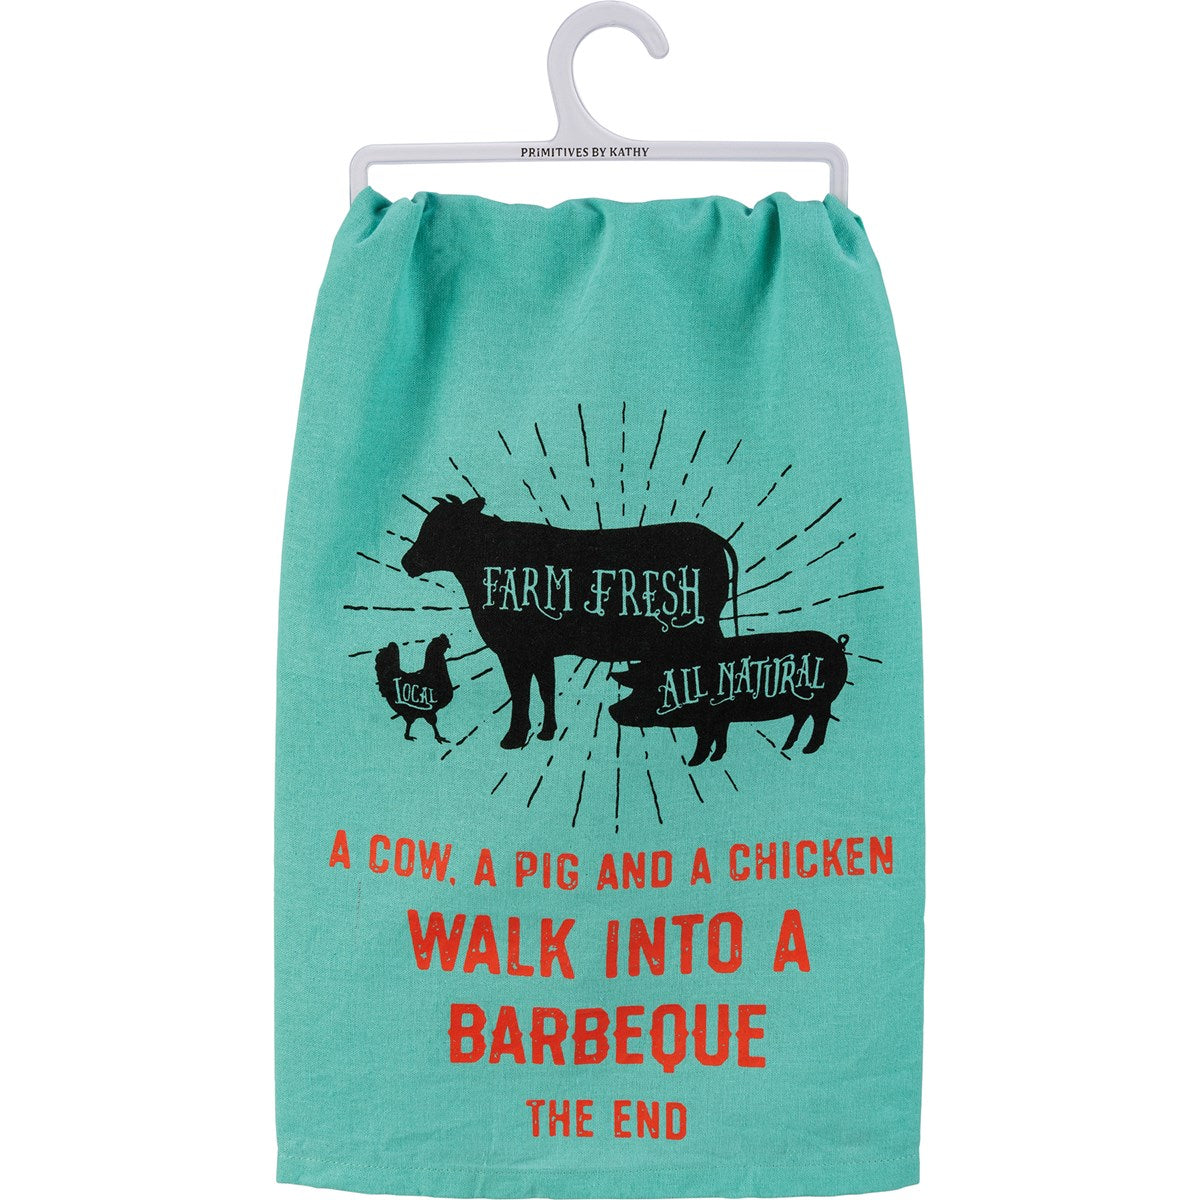 "WALK INTO A BARBEQUE THE END" DISH TOWEL